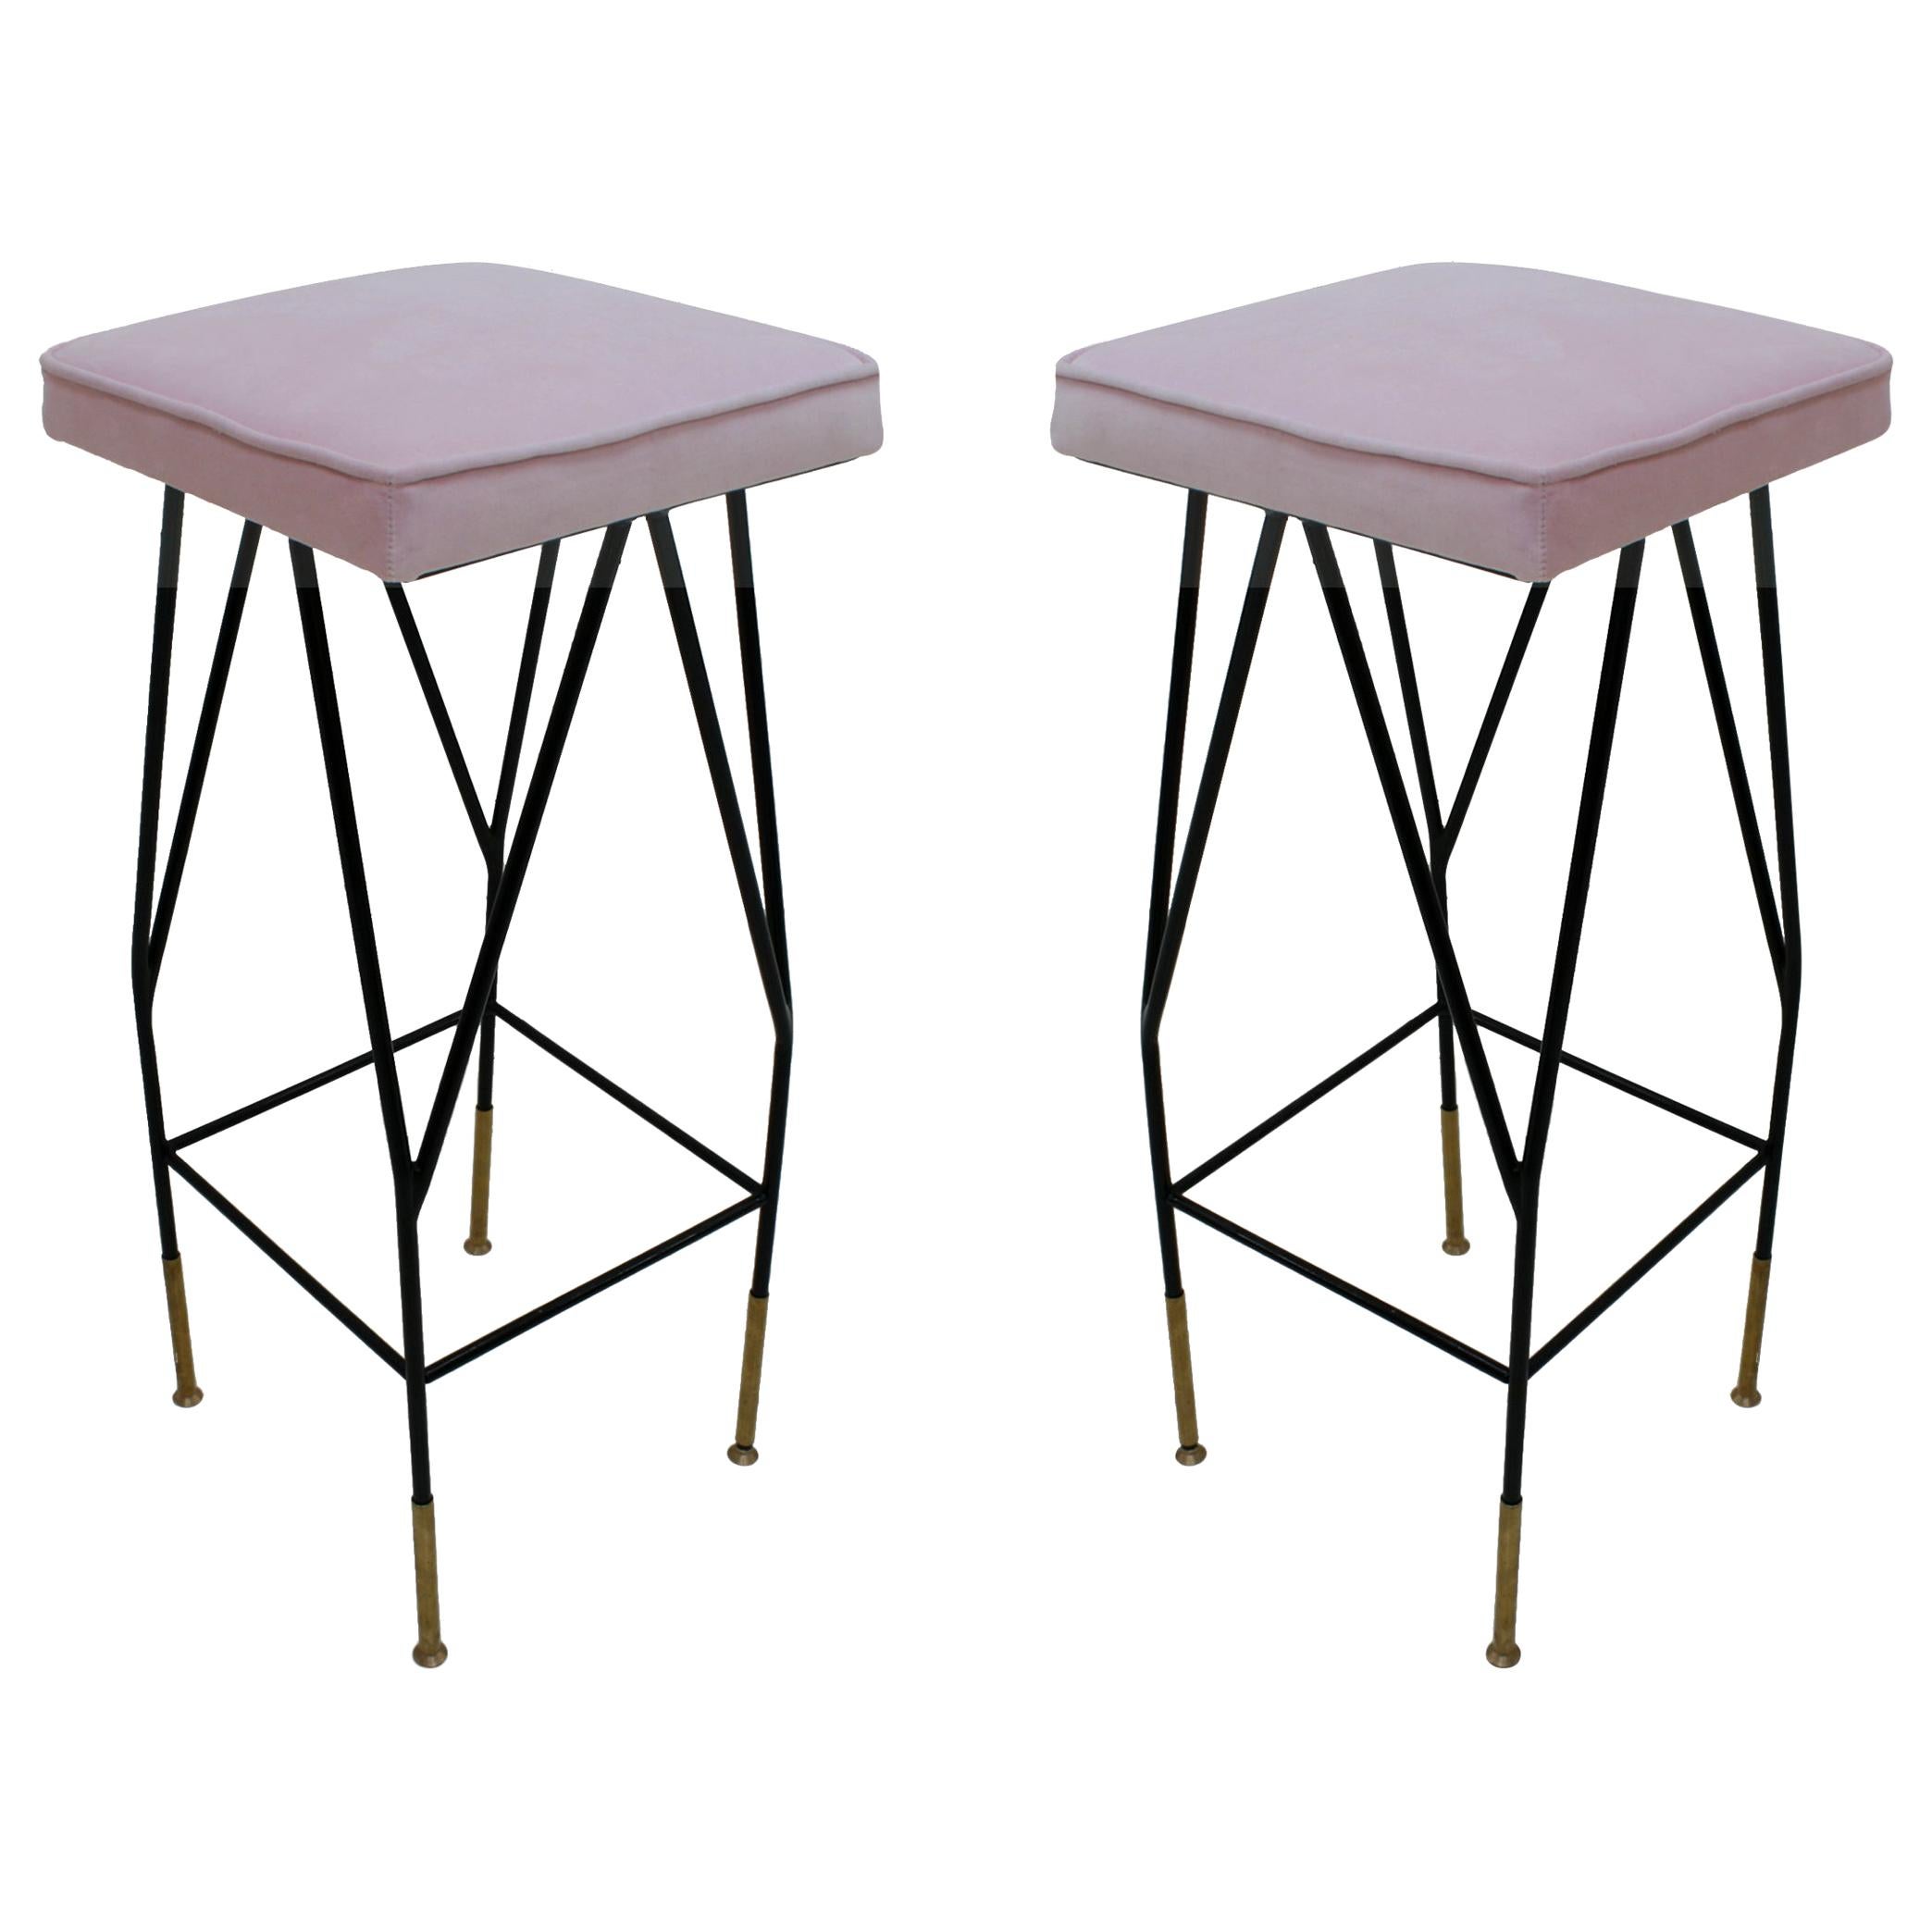 Pink Cotton Velvet and Black Lacquered Metal Italian Stools In Good Condition For Sale In Ibiza, Spain